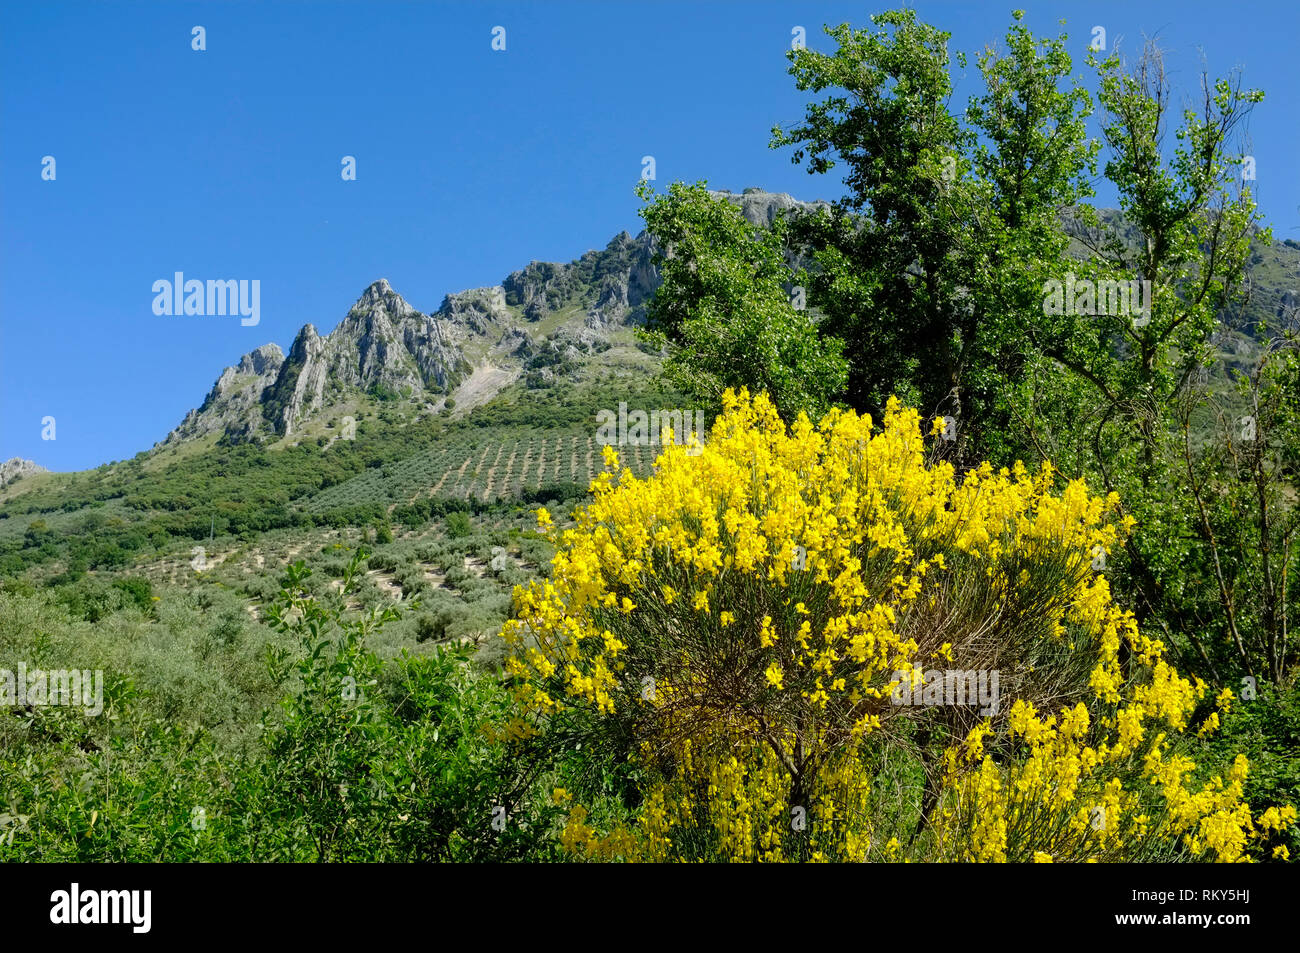 Springtime with yellow flowering broom, the mountains and olive groves in the Sierra Subbetica, a Natural Park in Cordoba Province, Andalucia, Spain. Stock Photo